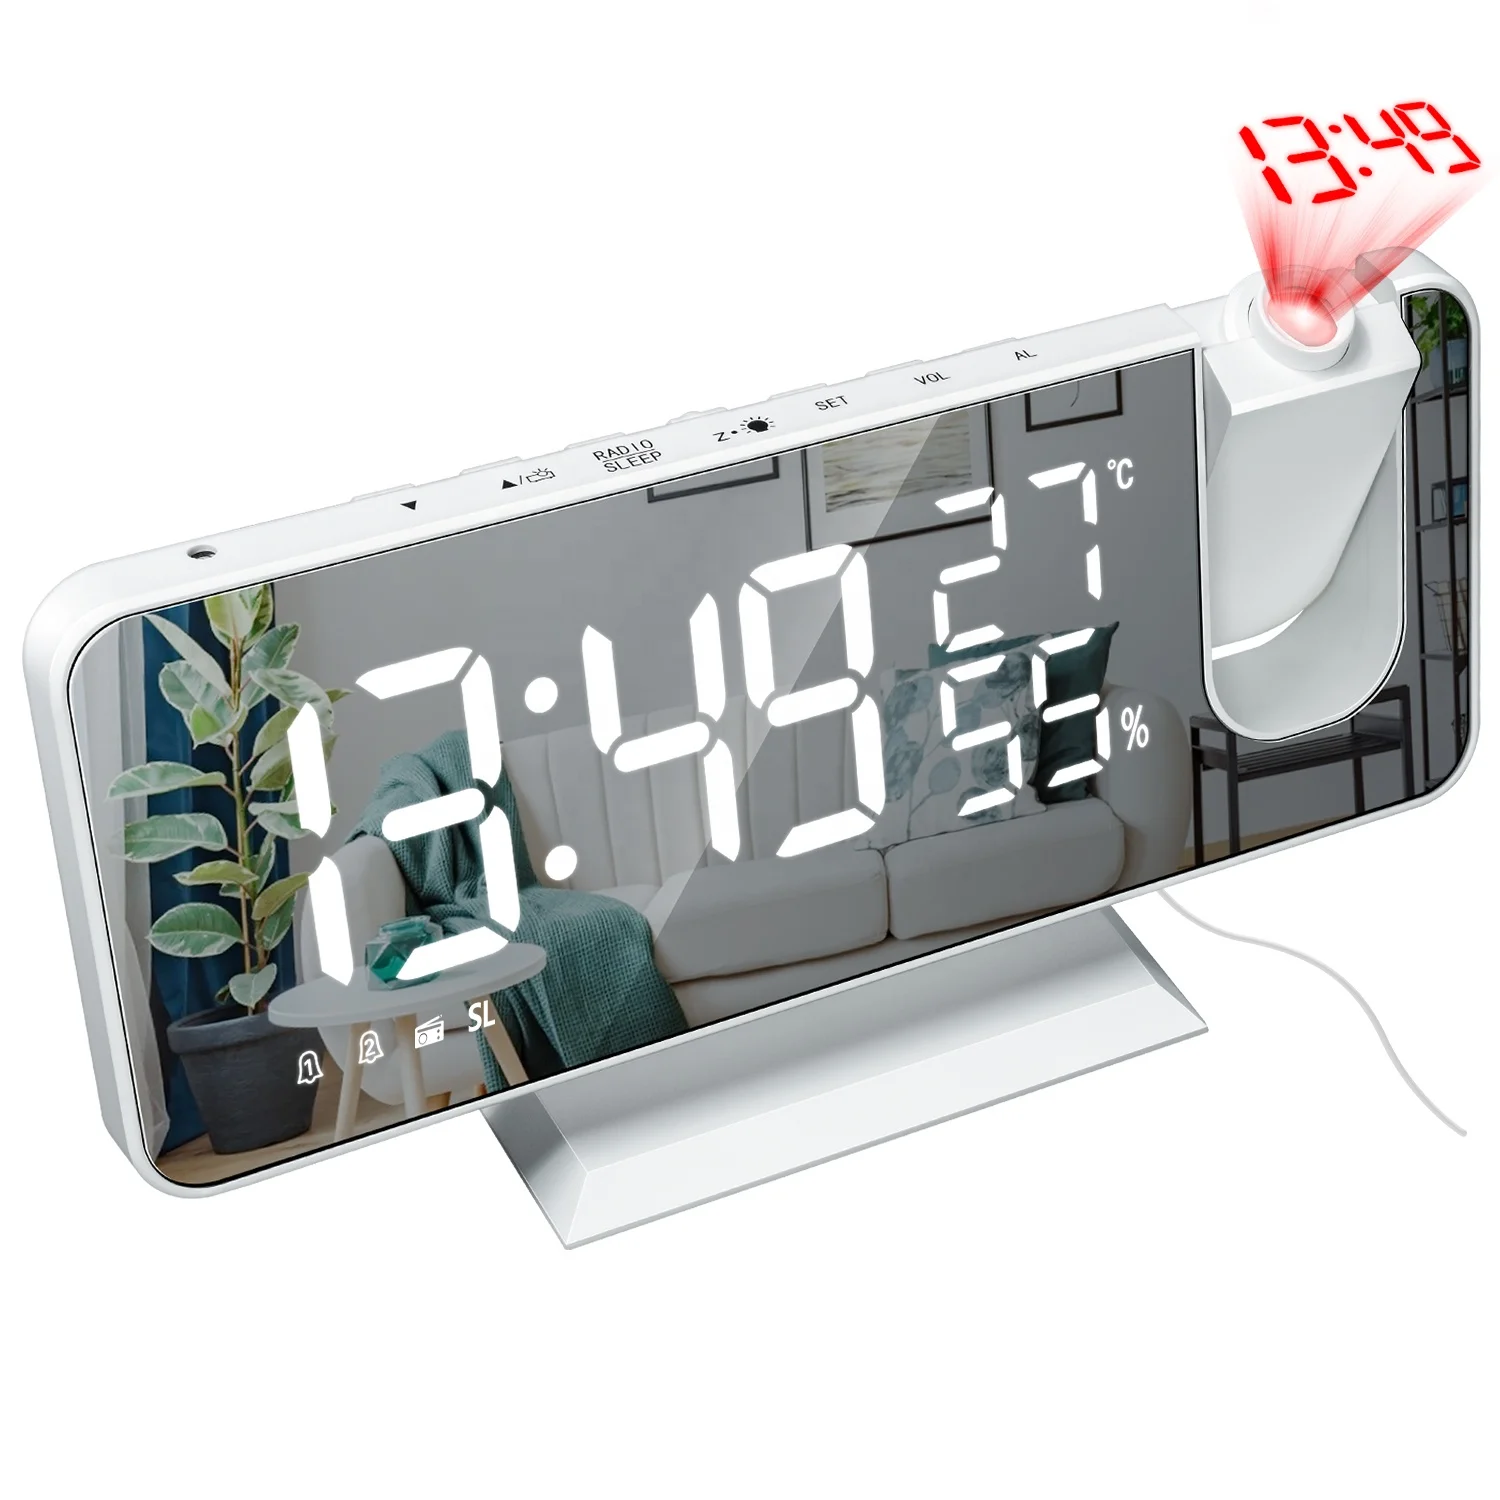 

2021 Patent Amazon Best Seller Desktop Electric Digital Projection Mini Light Alarm Table Mirror LED Clock With Time Projector, Any pantone color, led color, customized logo, package all available